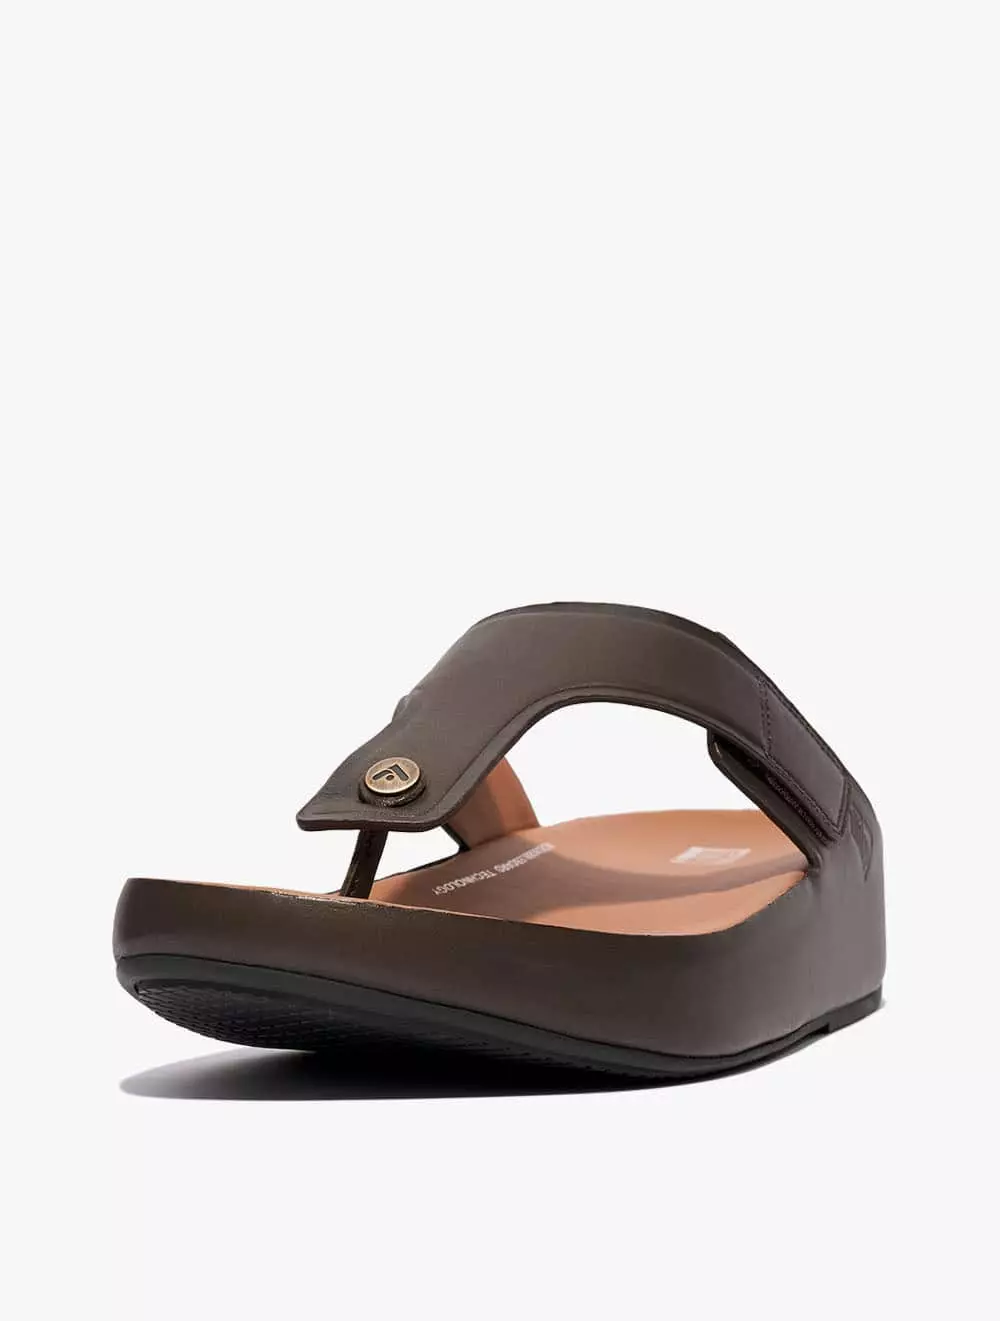 Fitflop Remi Chocolate Brown Leather Adjustable Toe Post Sandals